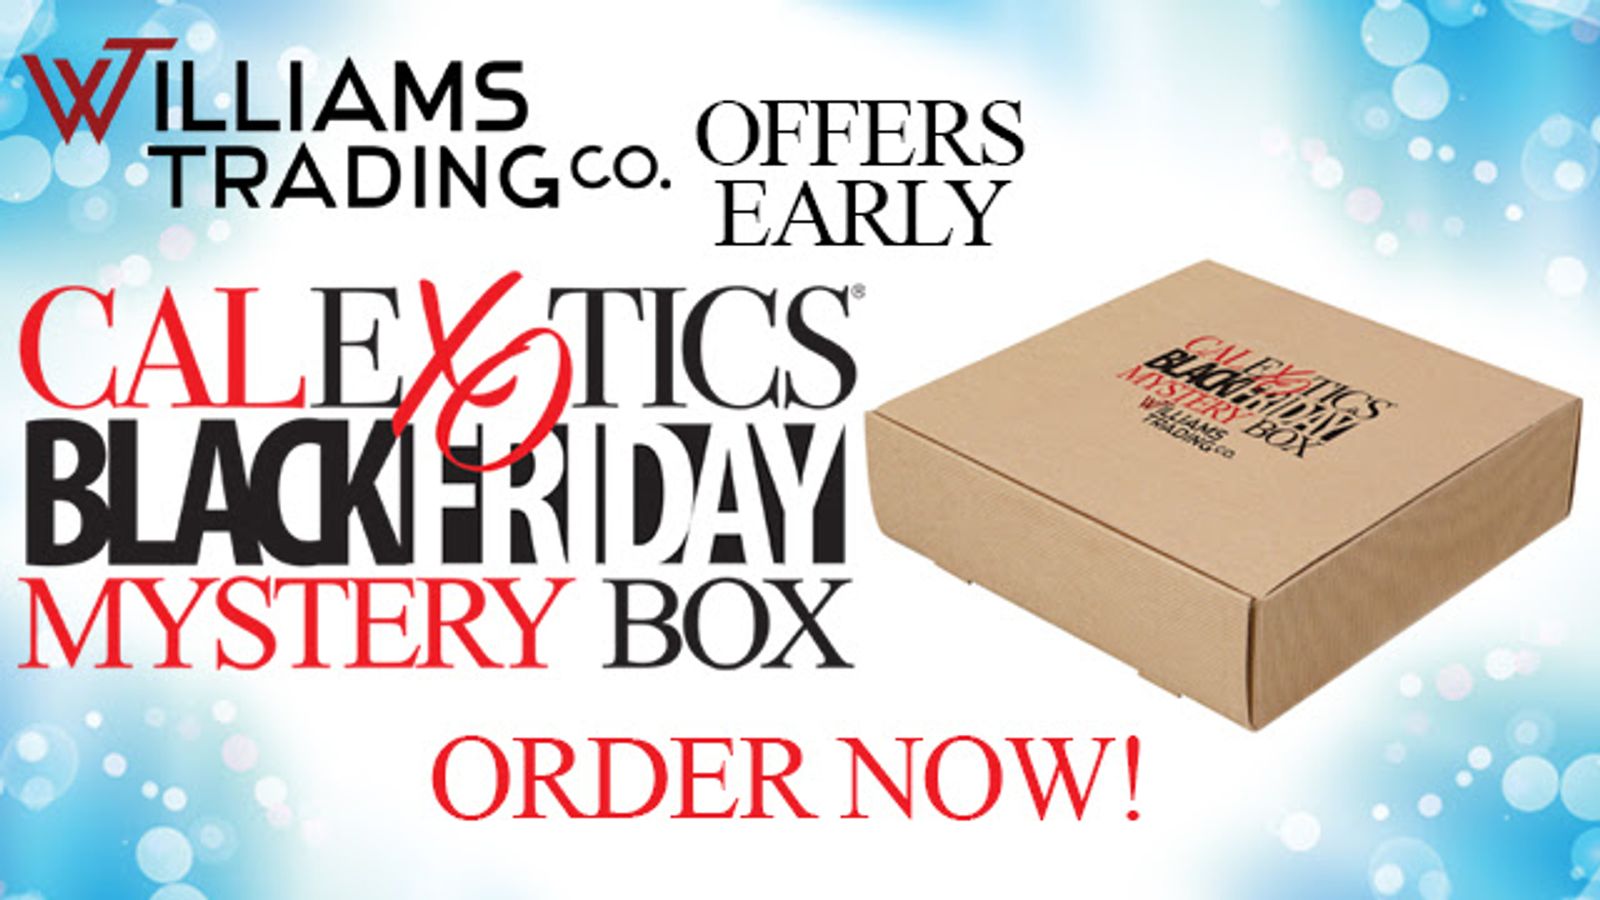 Williams Trading Offers Early Black Friday CalExotics Mystery Box